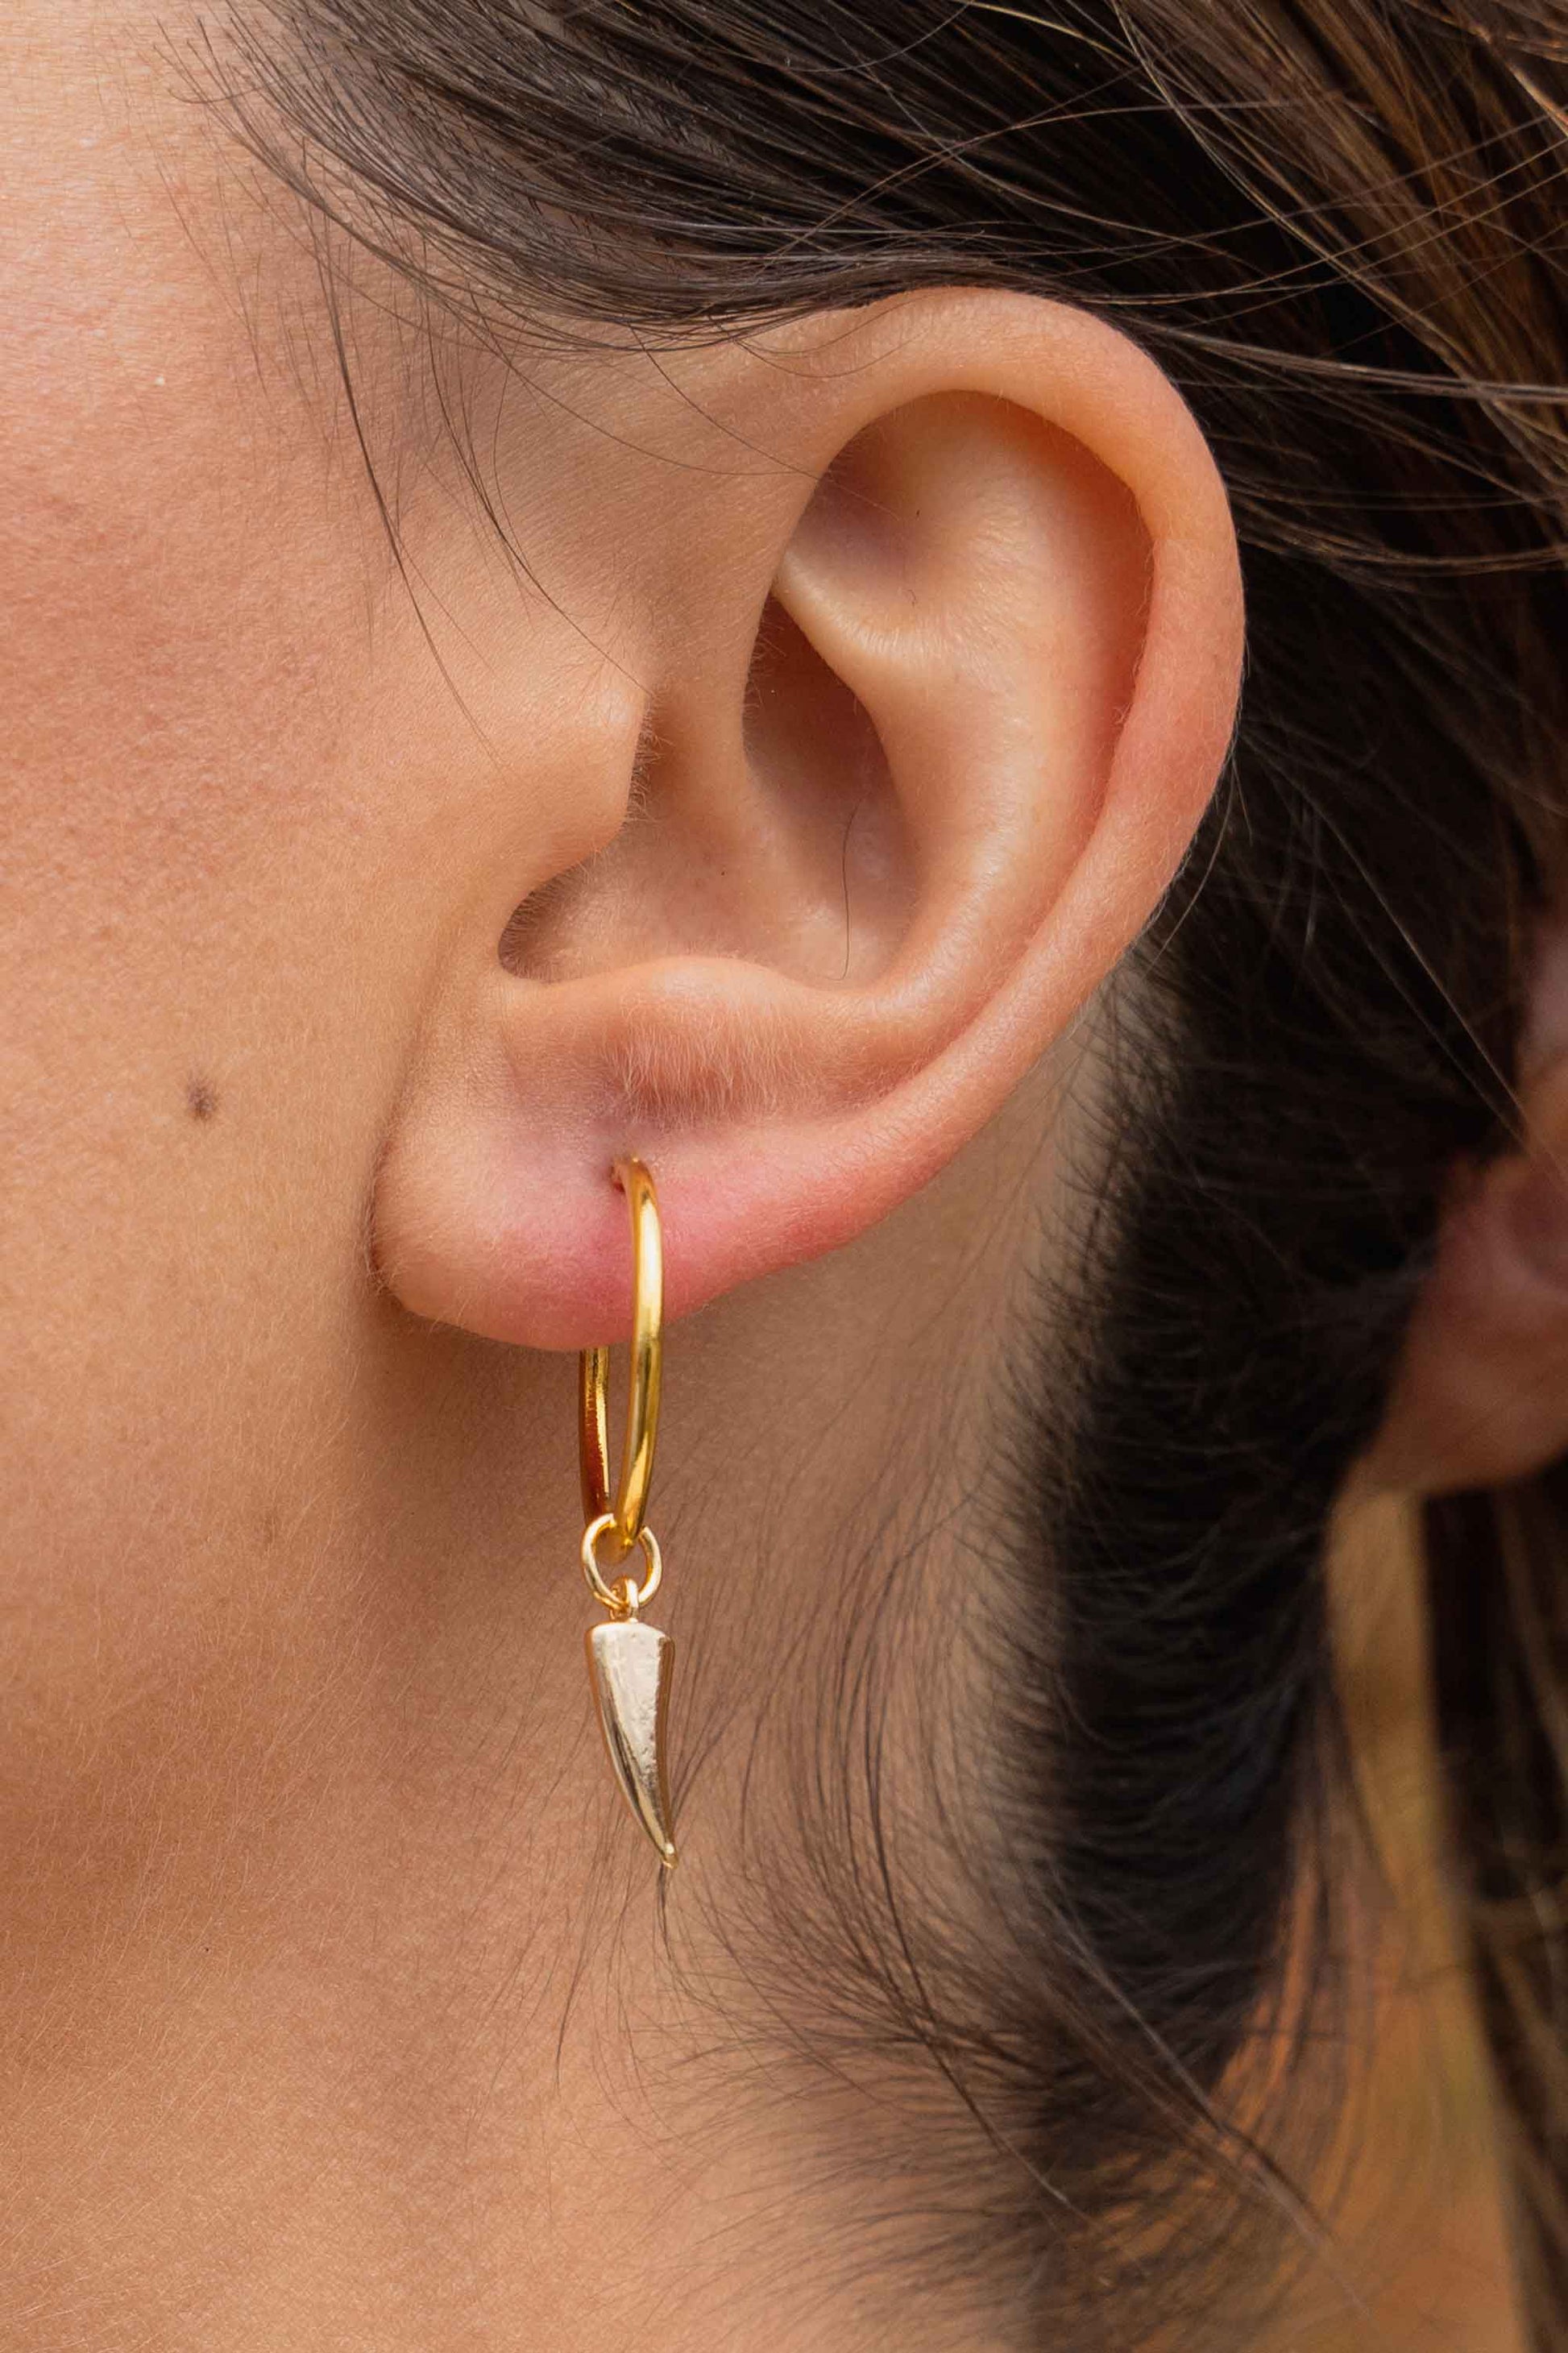 horn-charm-gold-classic-hoop-earrings-on-body-close